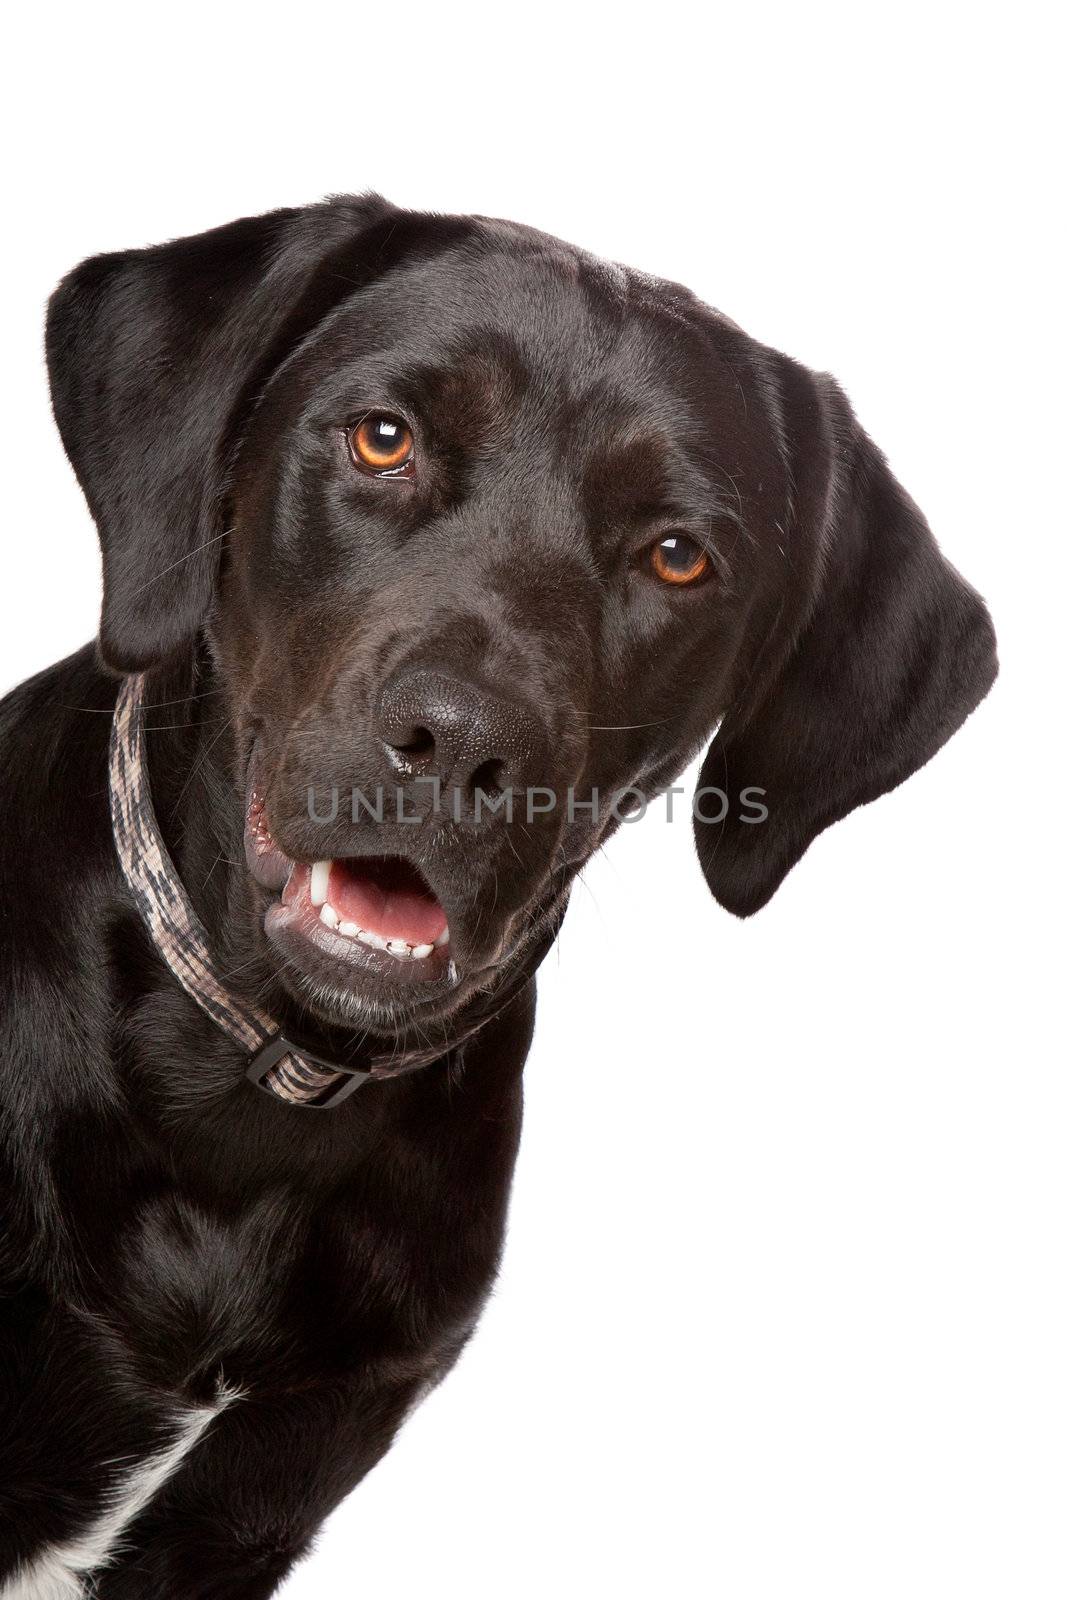 mixed breed lab cross - one year old isolated on white background